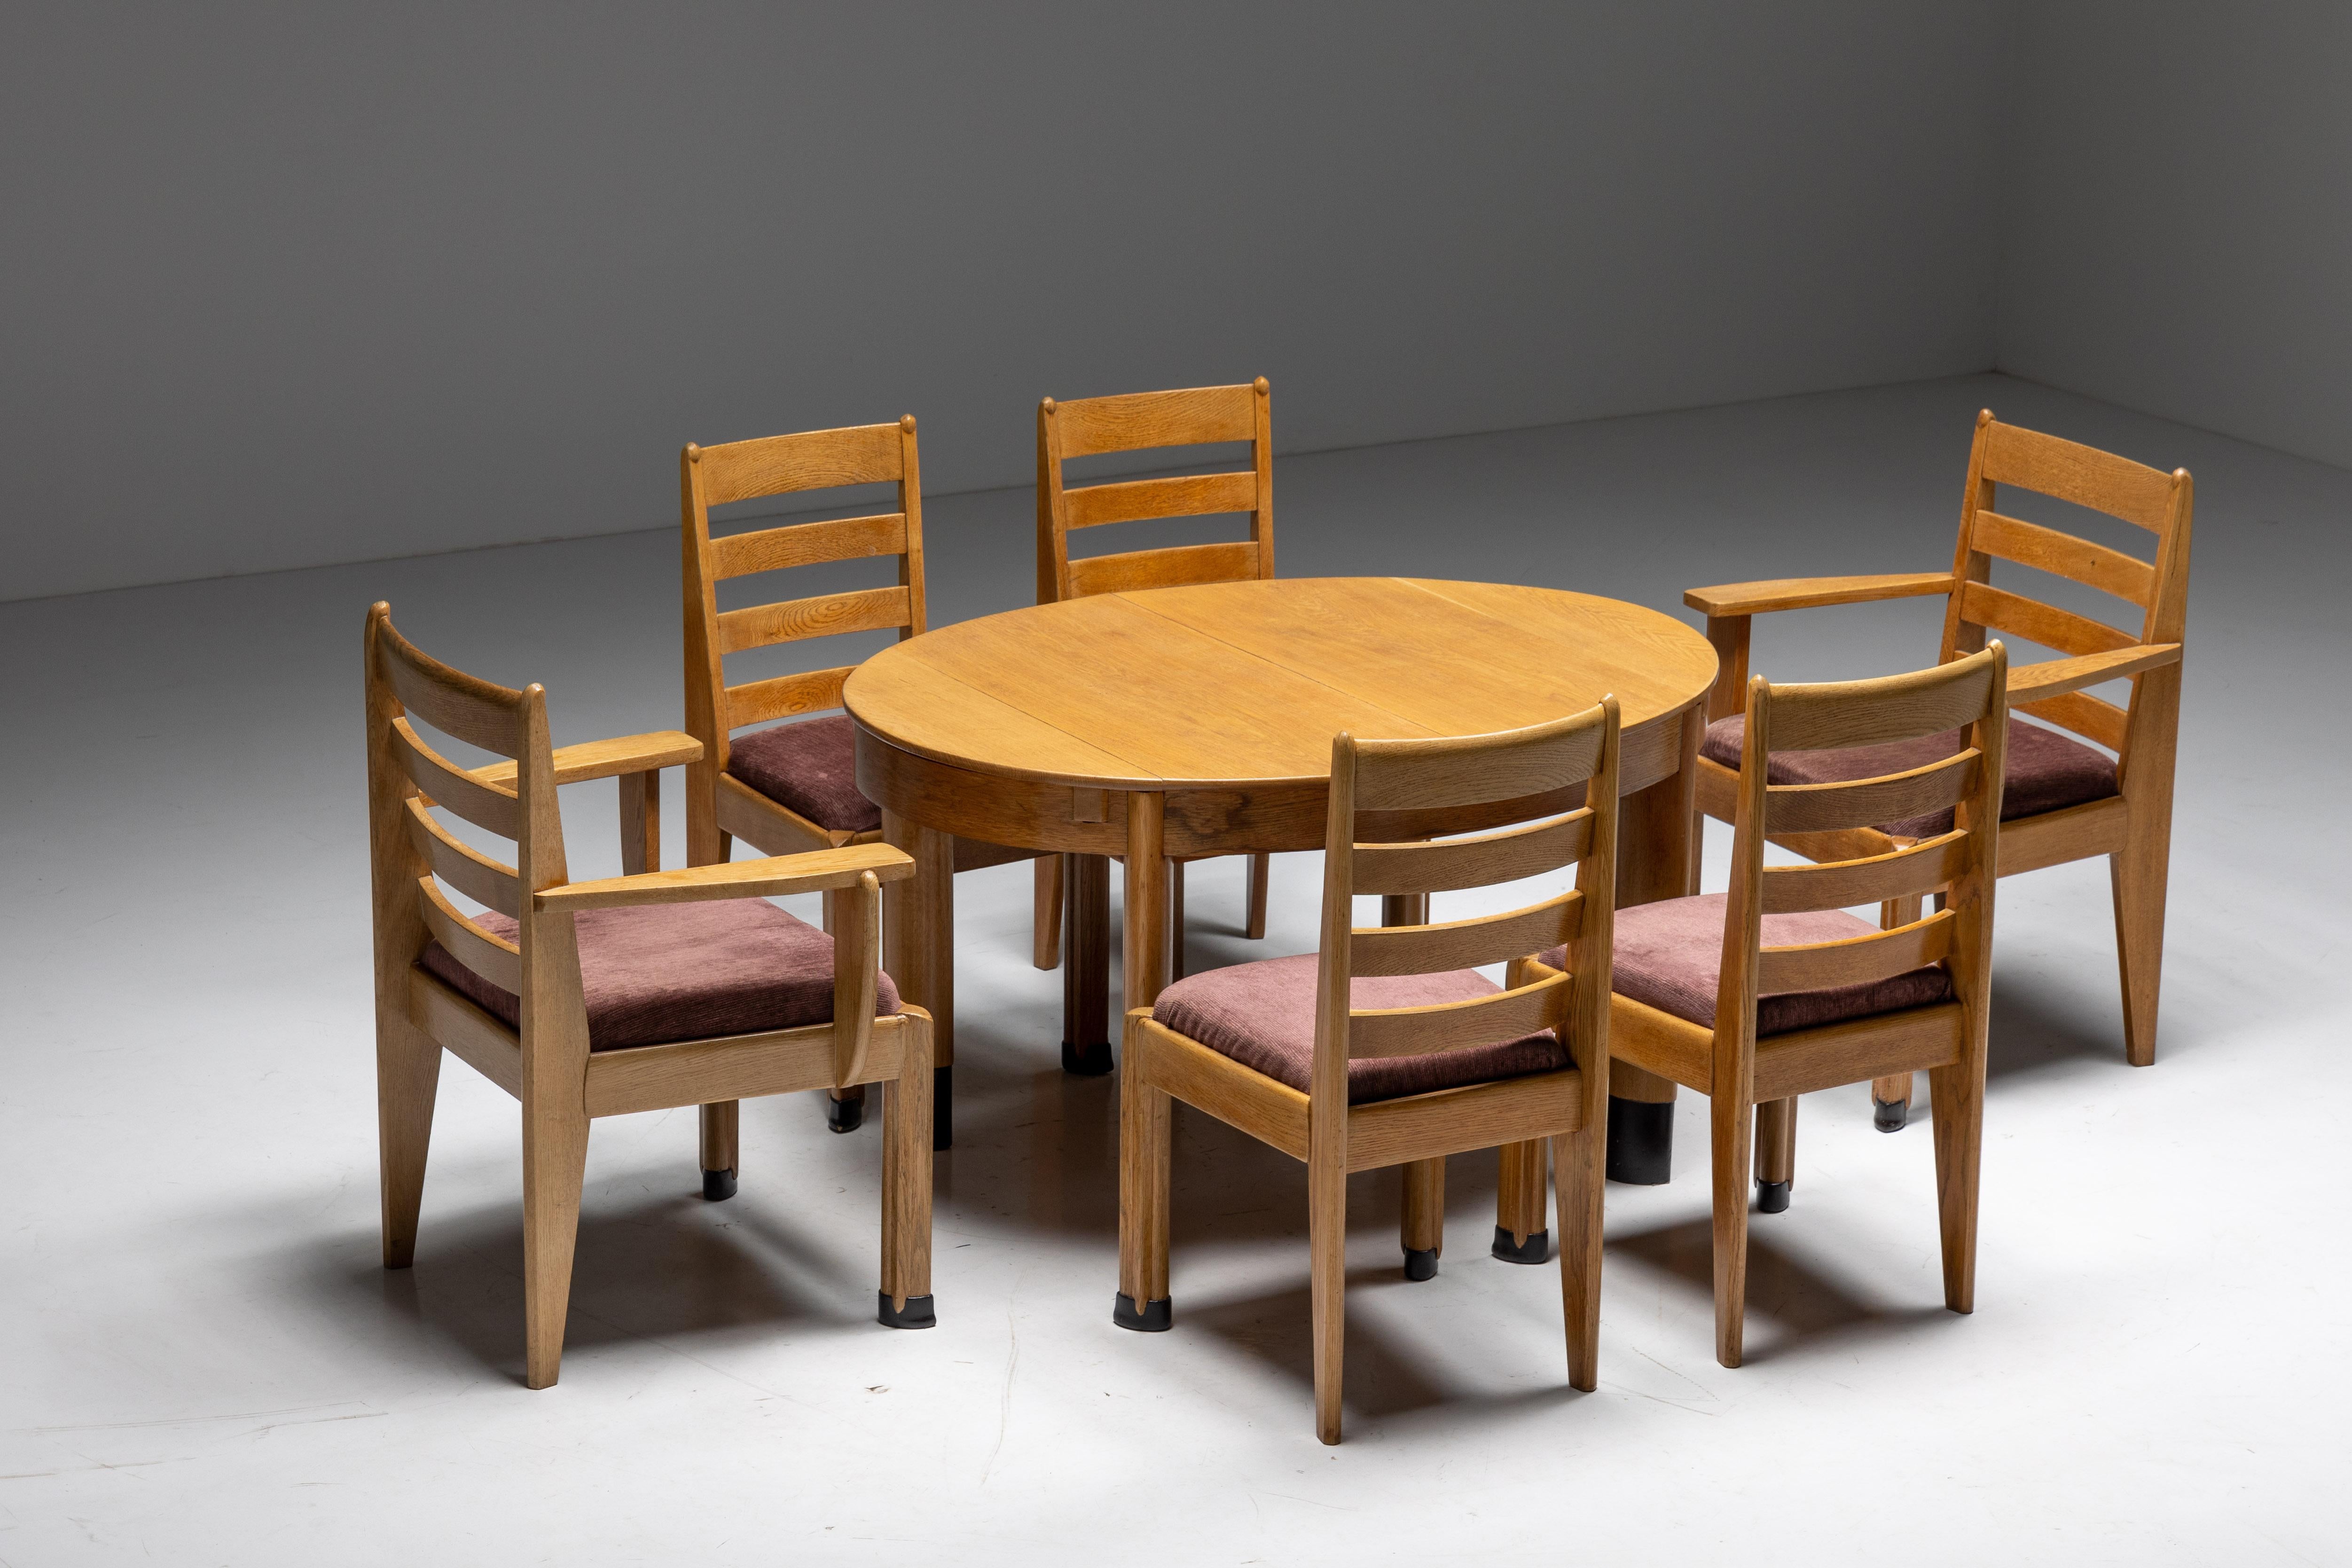 Oak dining set, Dutch Art Deco era, Hague school, 1928

Oval dining table in oak, on juxtaposed oval legs, Dutch, 1920s
Rationalist dining chairs, set of four, with sculptural front legs.
Rationalist armchairs, a pair, with sculptural arms and